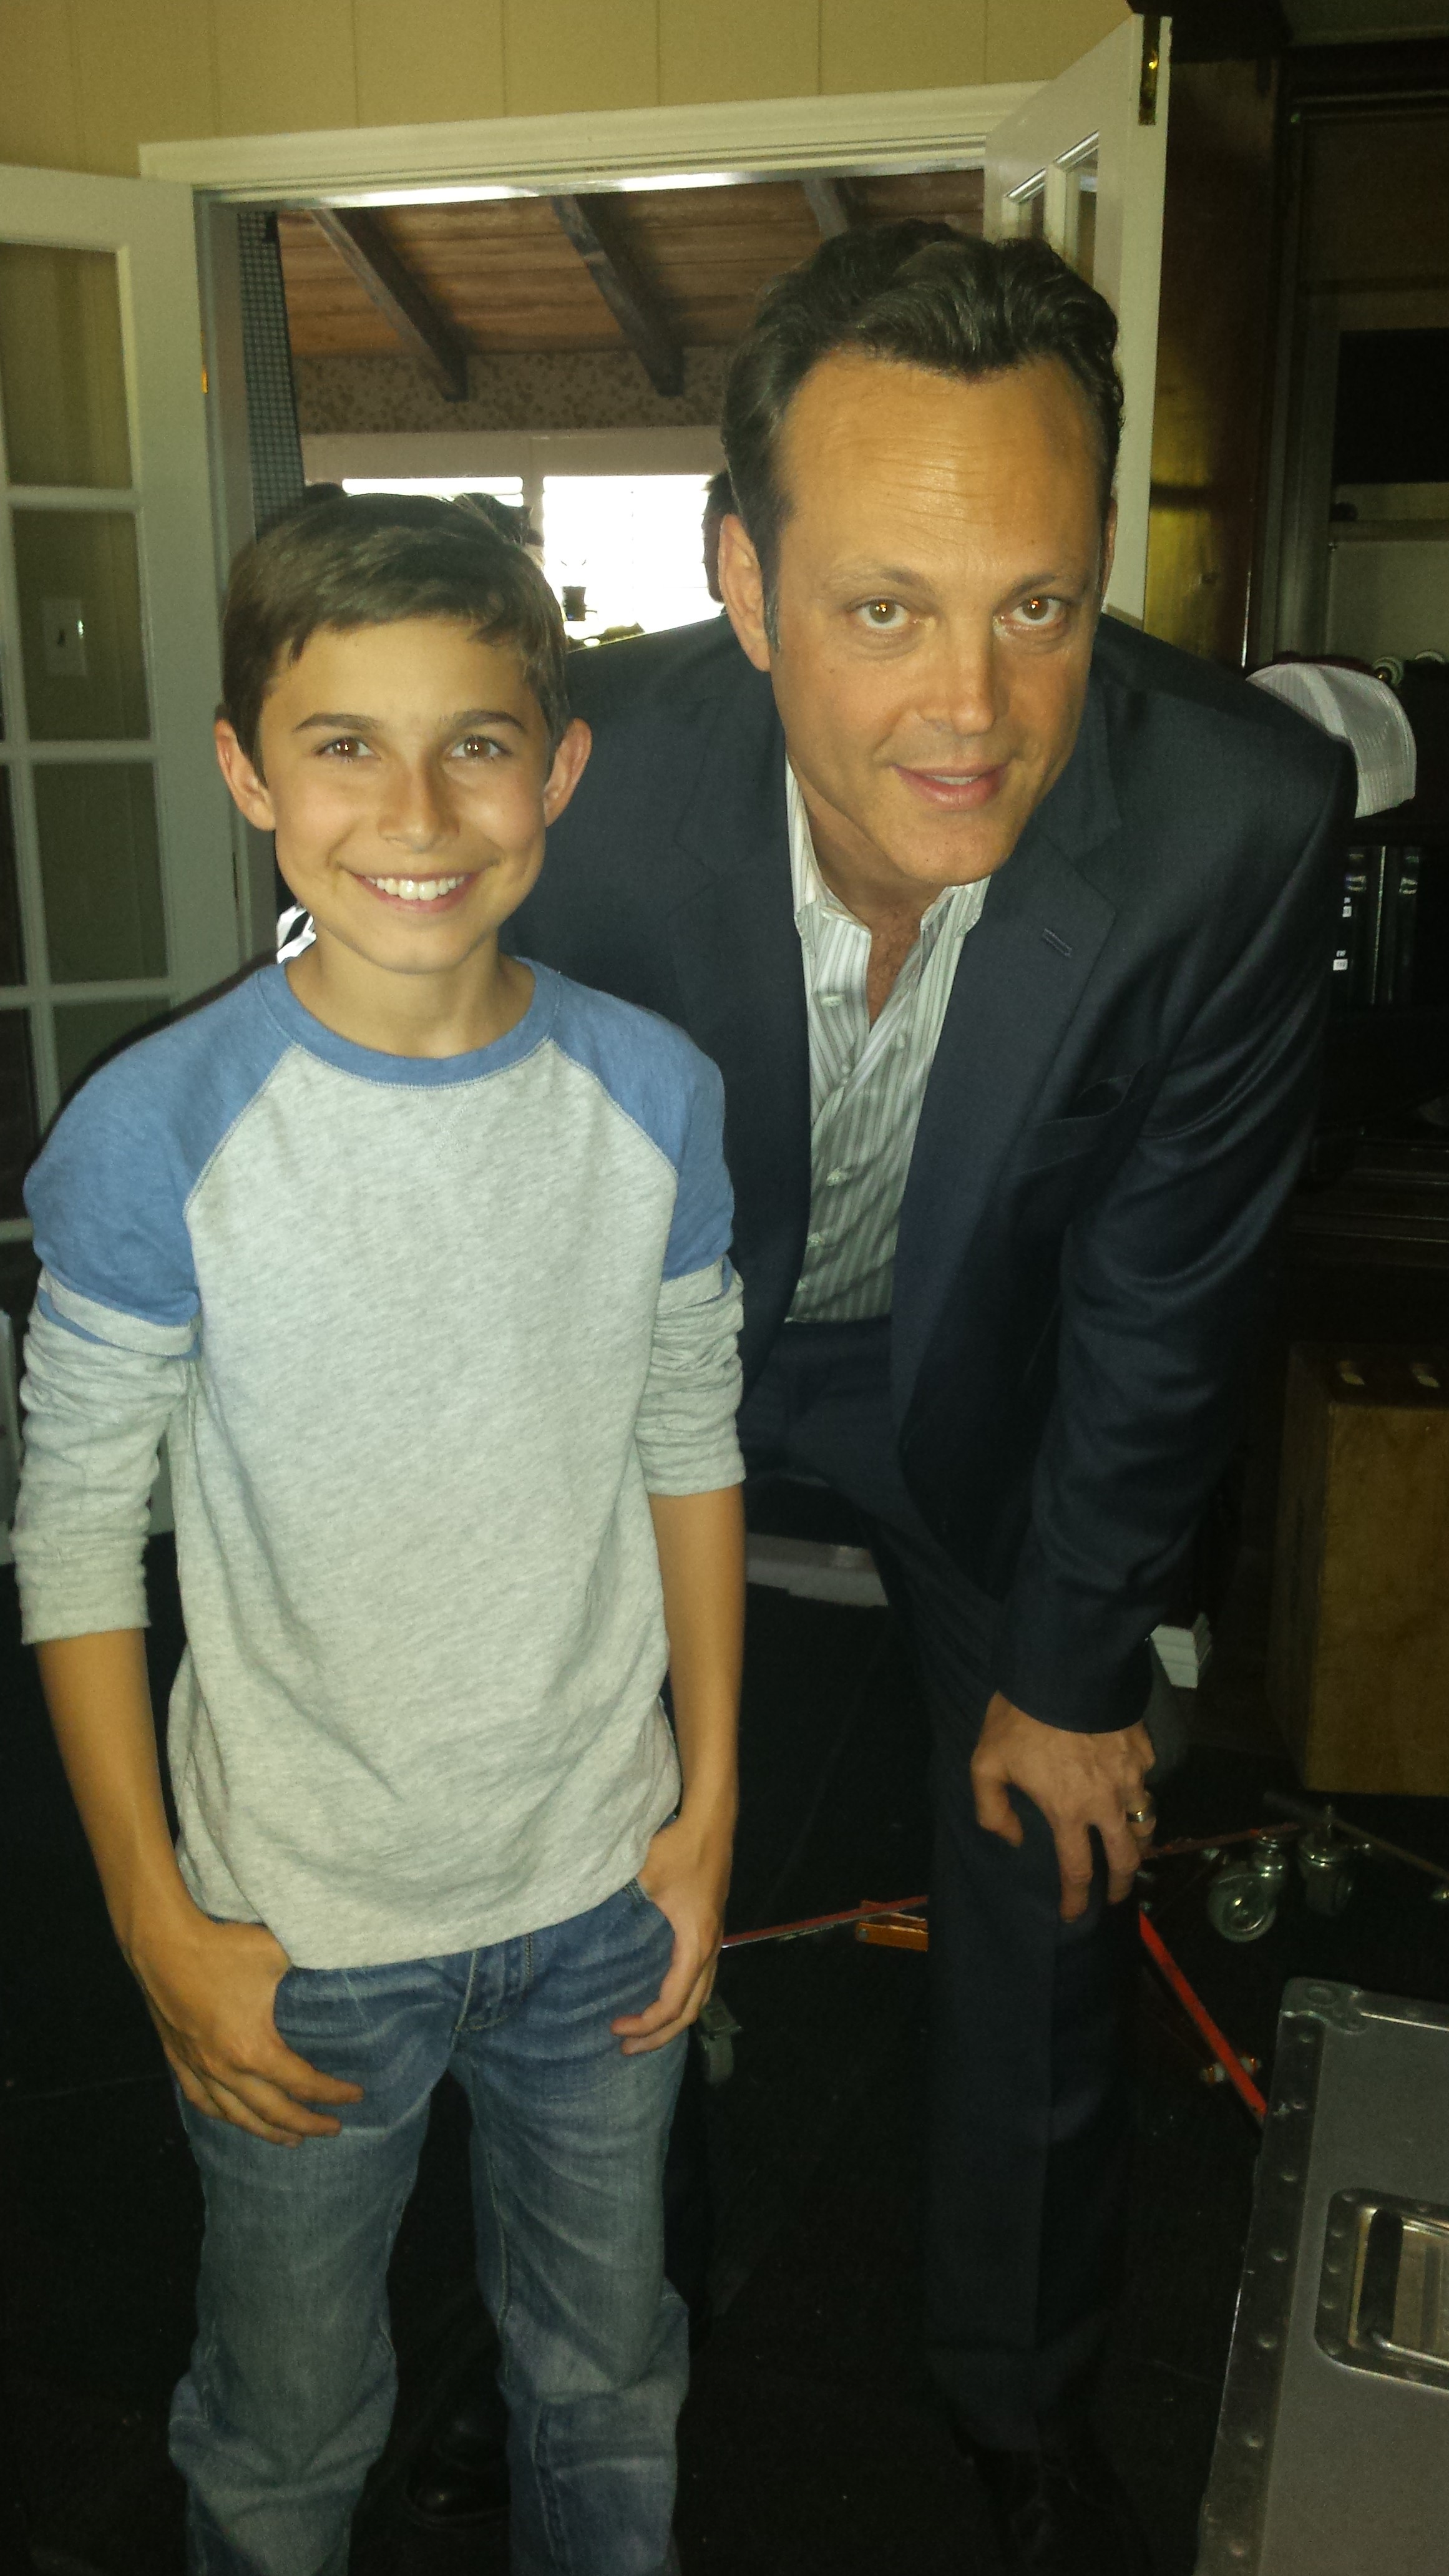 Austin Chase with Vince Vaughn on the set of True Detective.